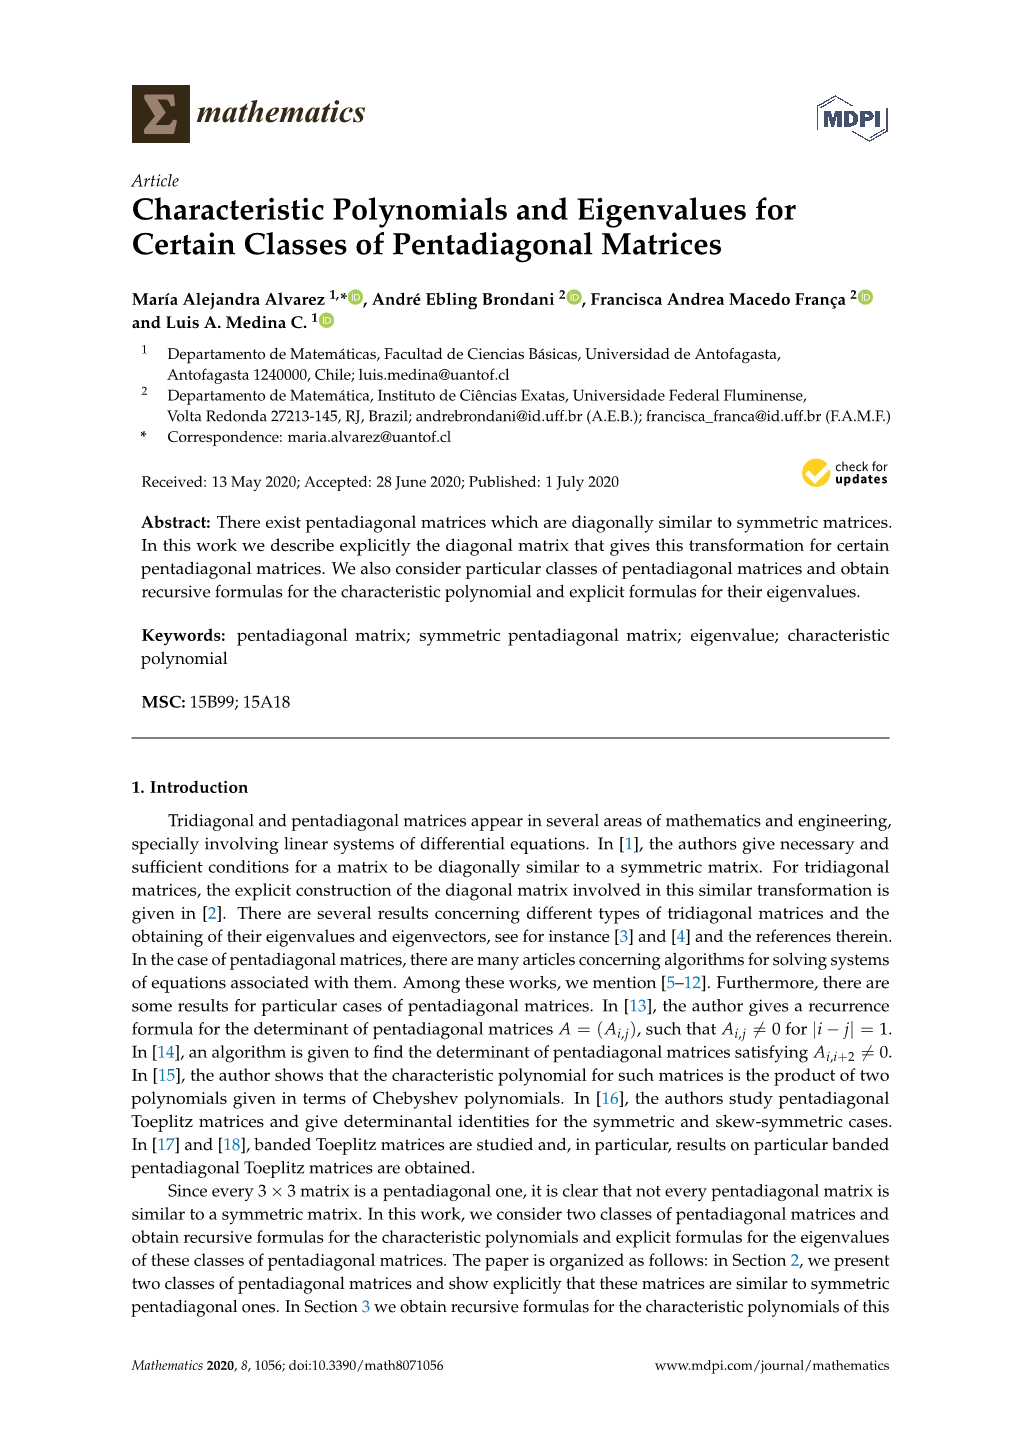 Characteristic Polynomials and Eigenvalues for Certain Classes of Pentadiagonal Matrices